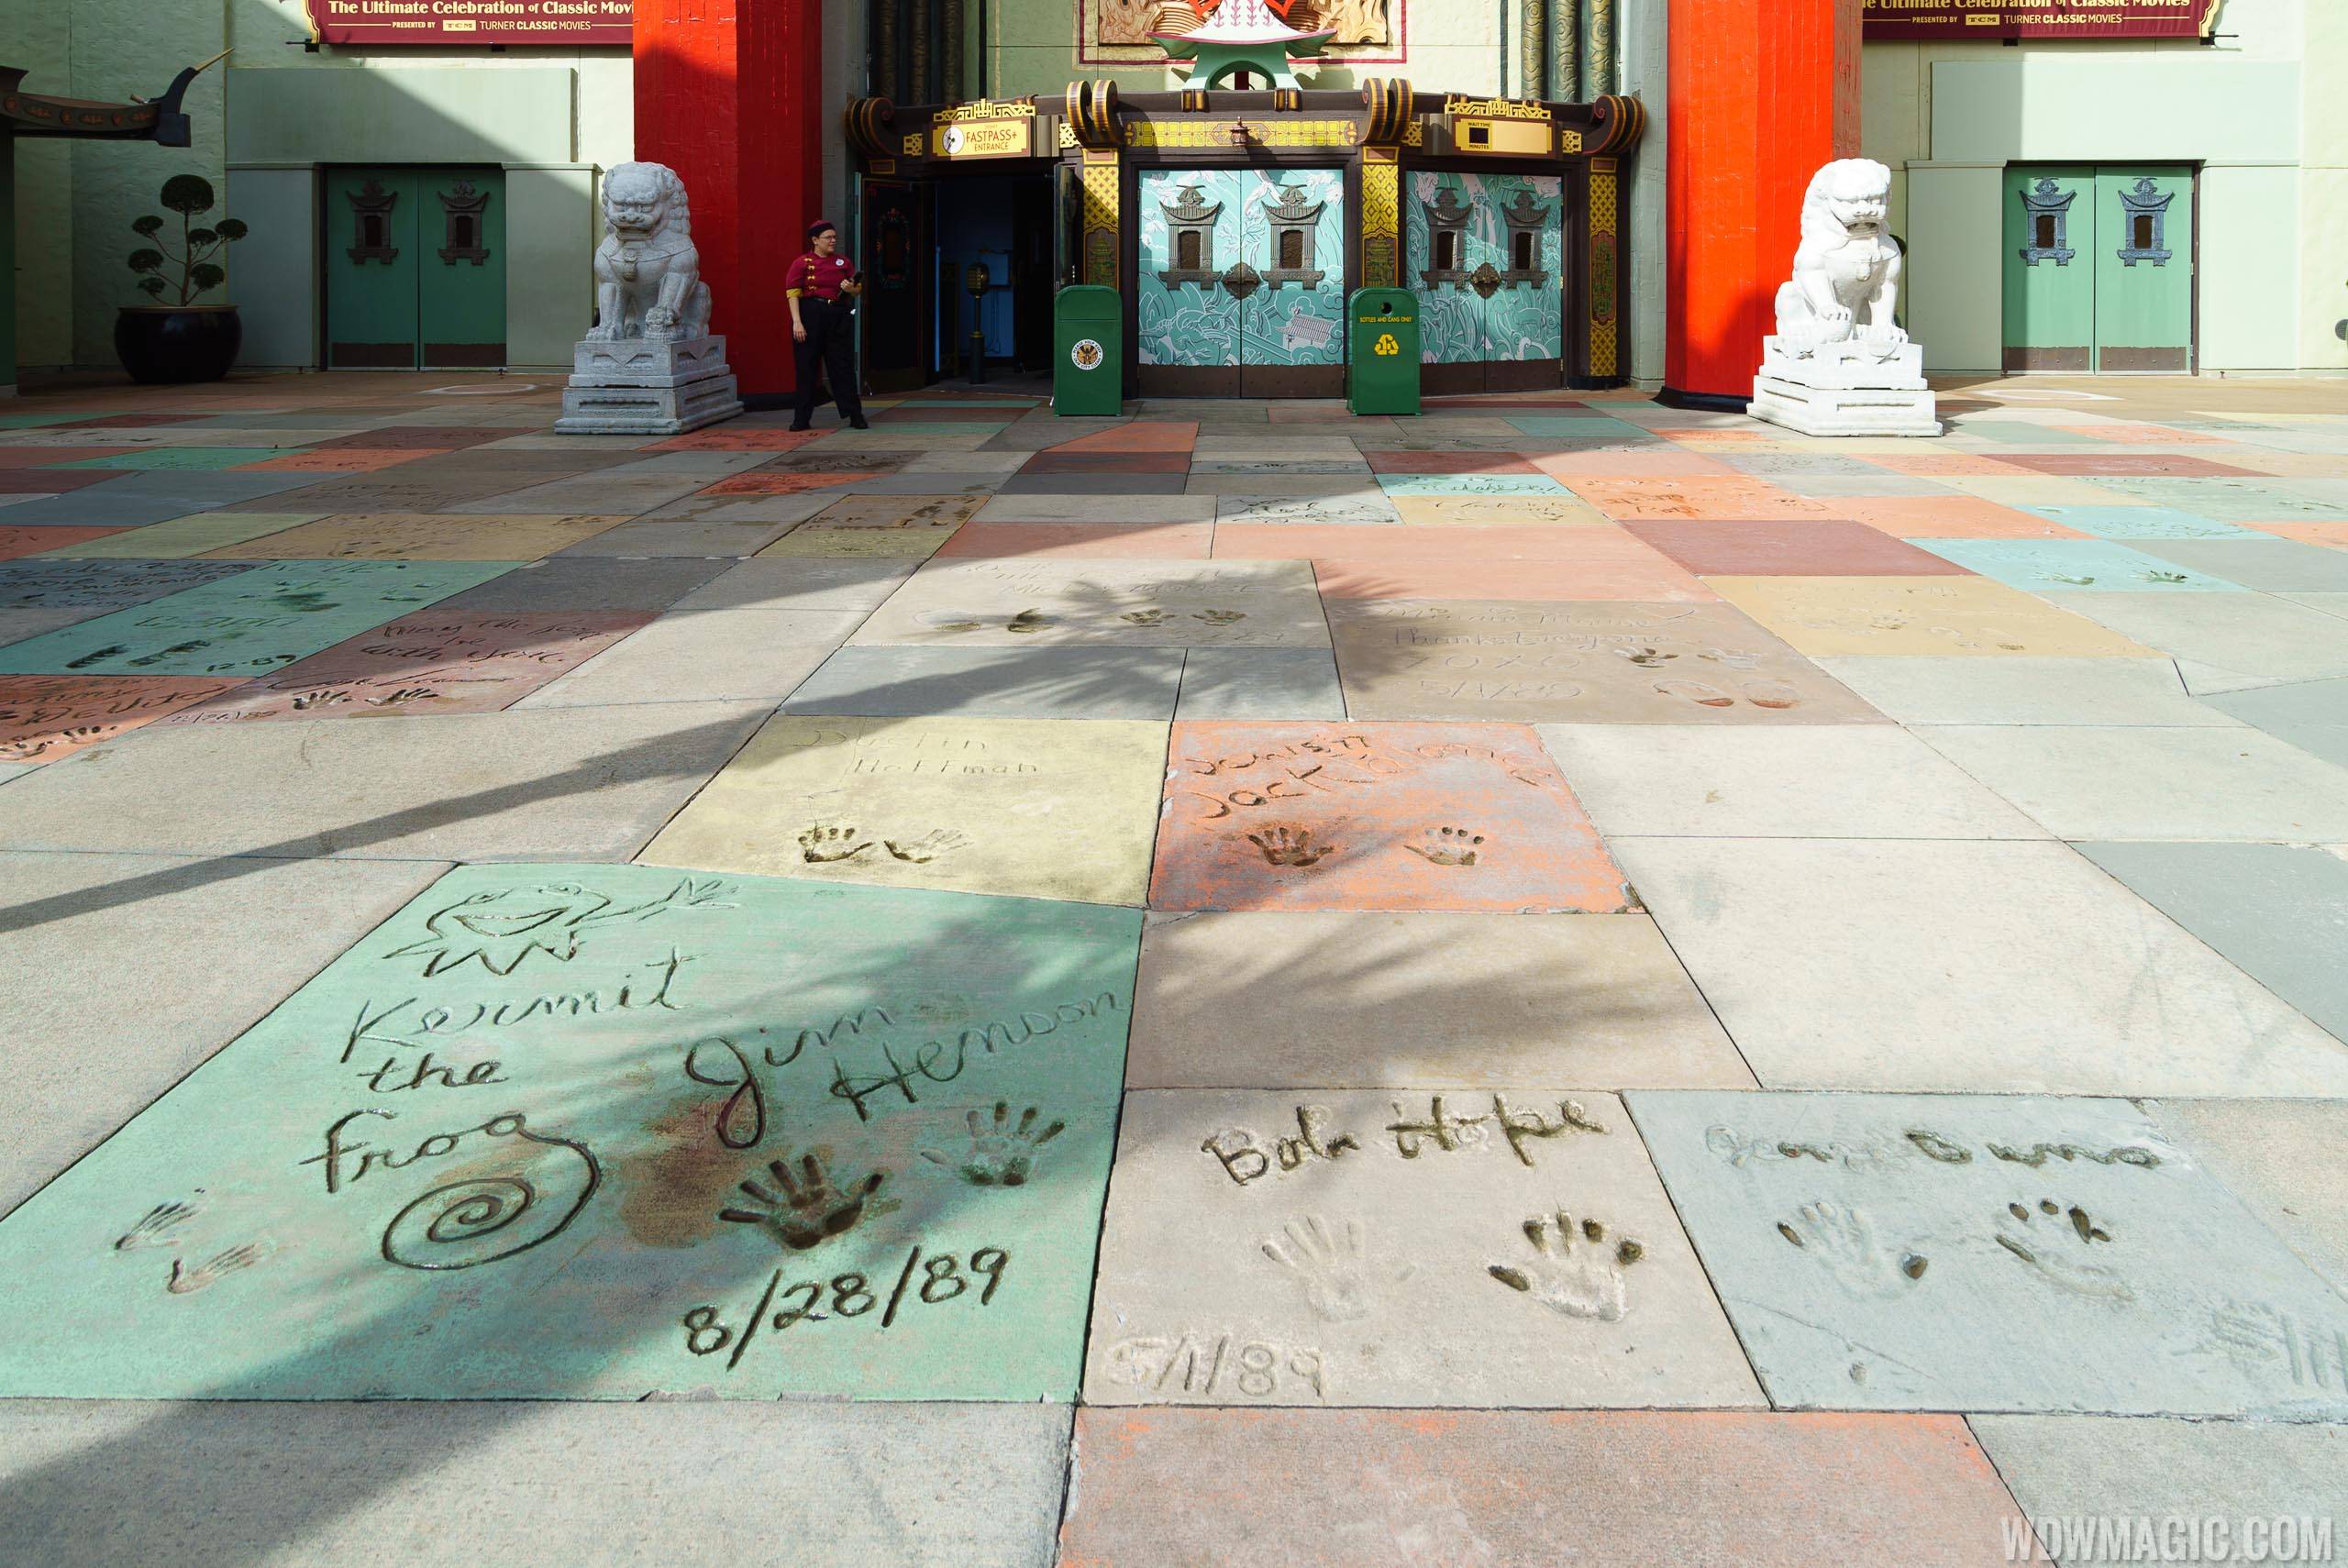 The Great Movie Ride - Hand prints